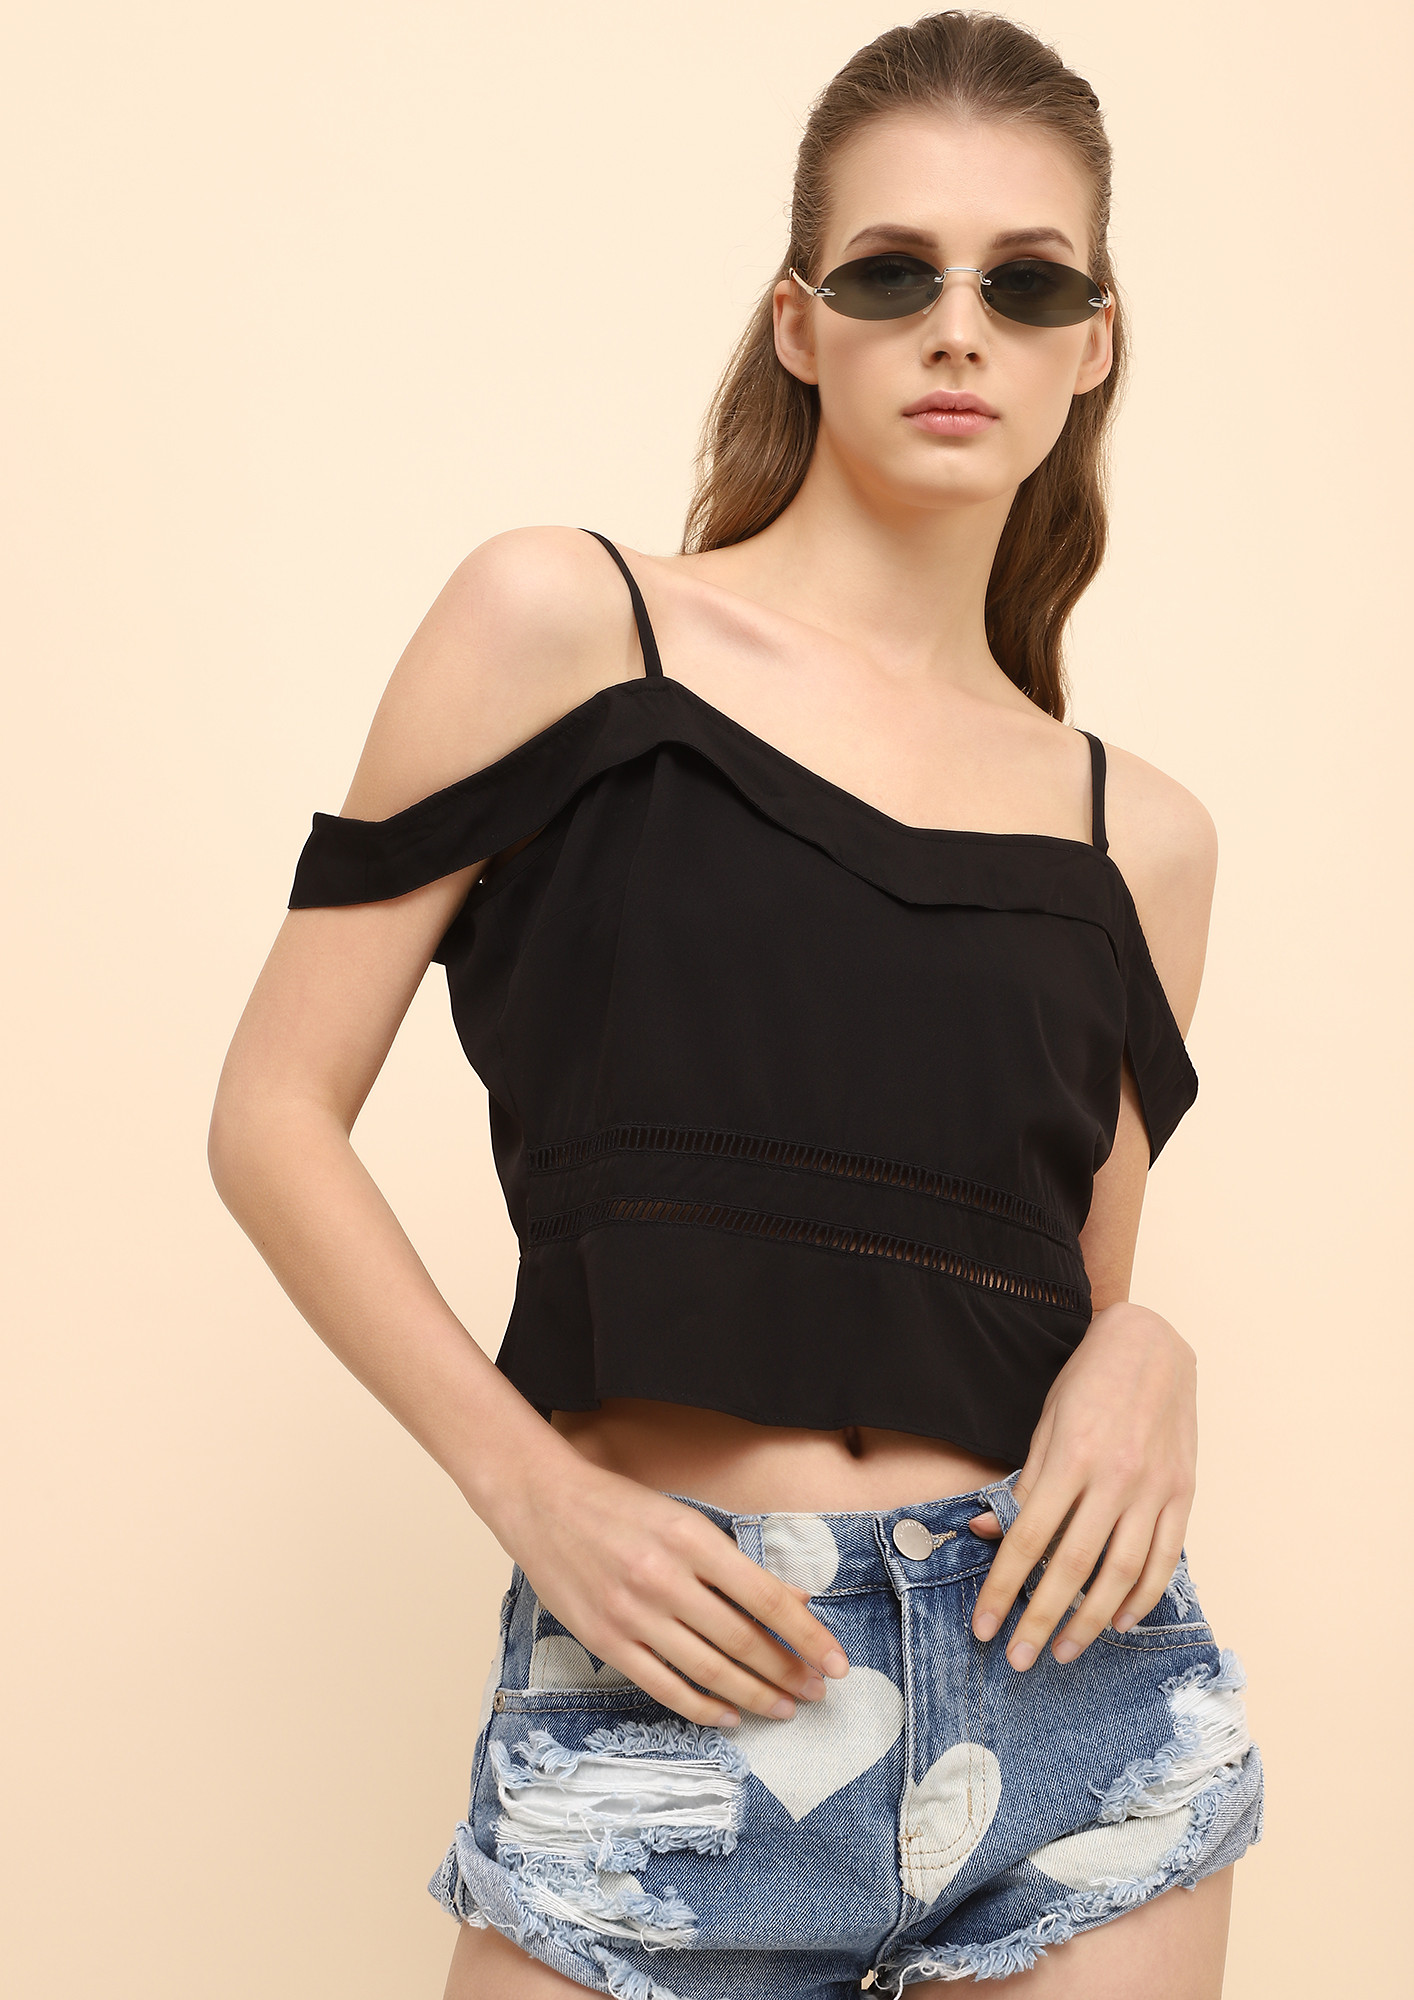 HEY THERE SHORTY BLACK CAMI TOP